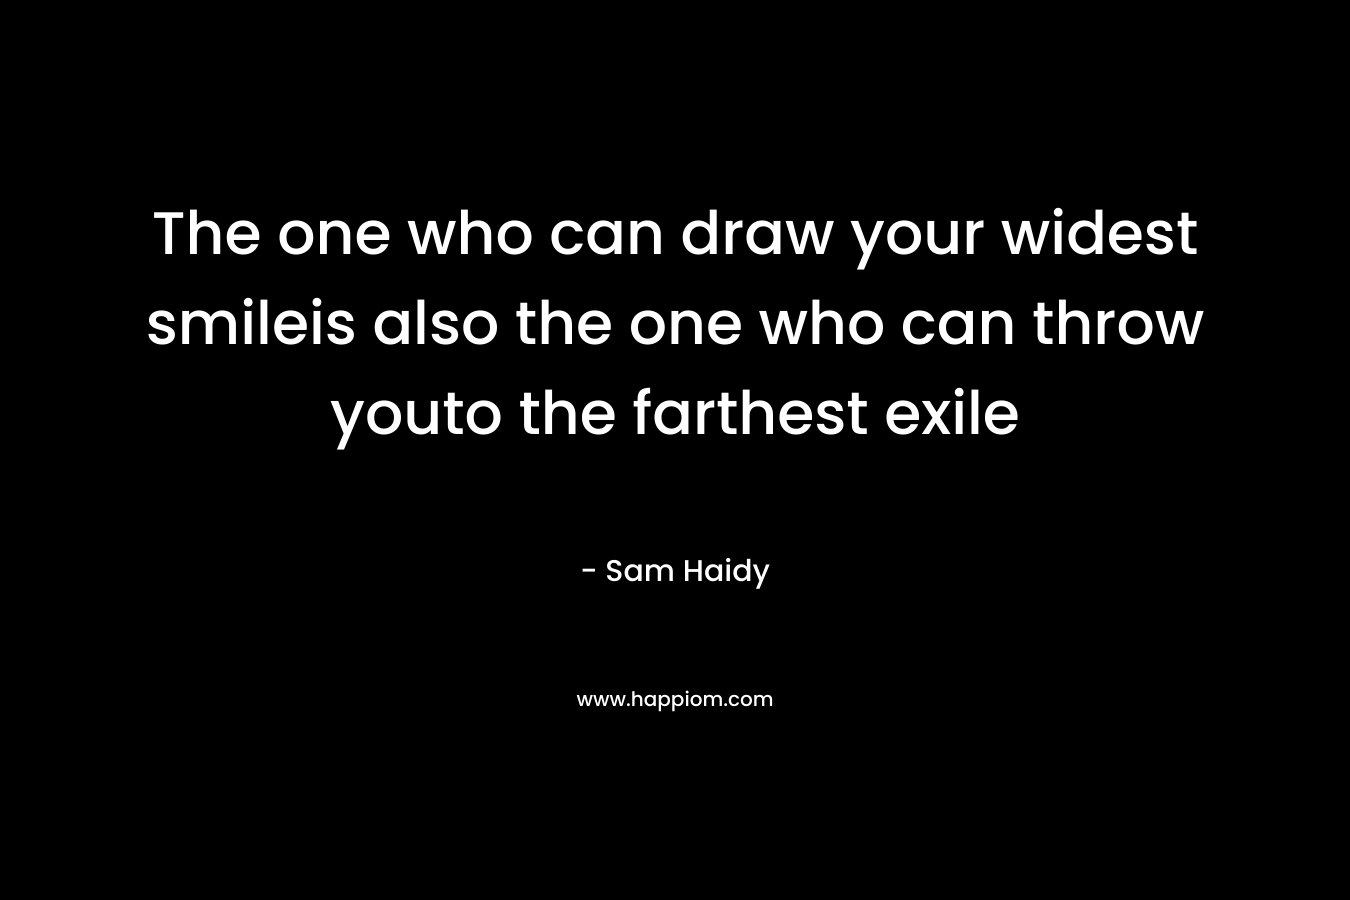 The one who can draw your widest smileis also the one who can throw youto the farthest exile – Sam Haidy